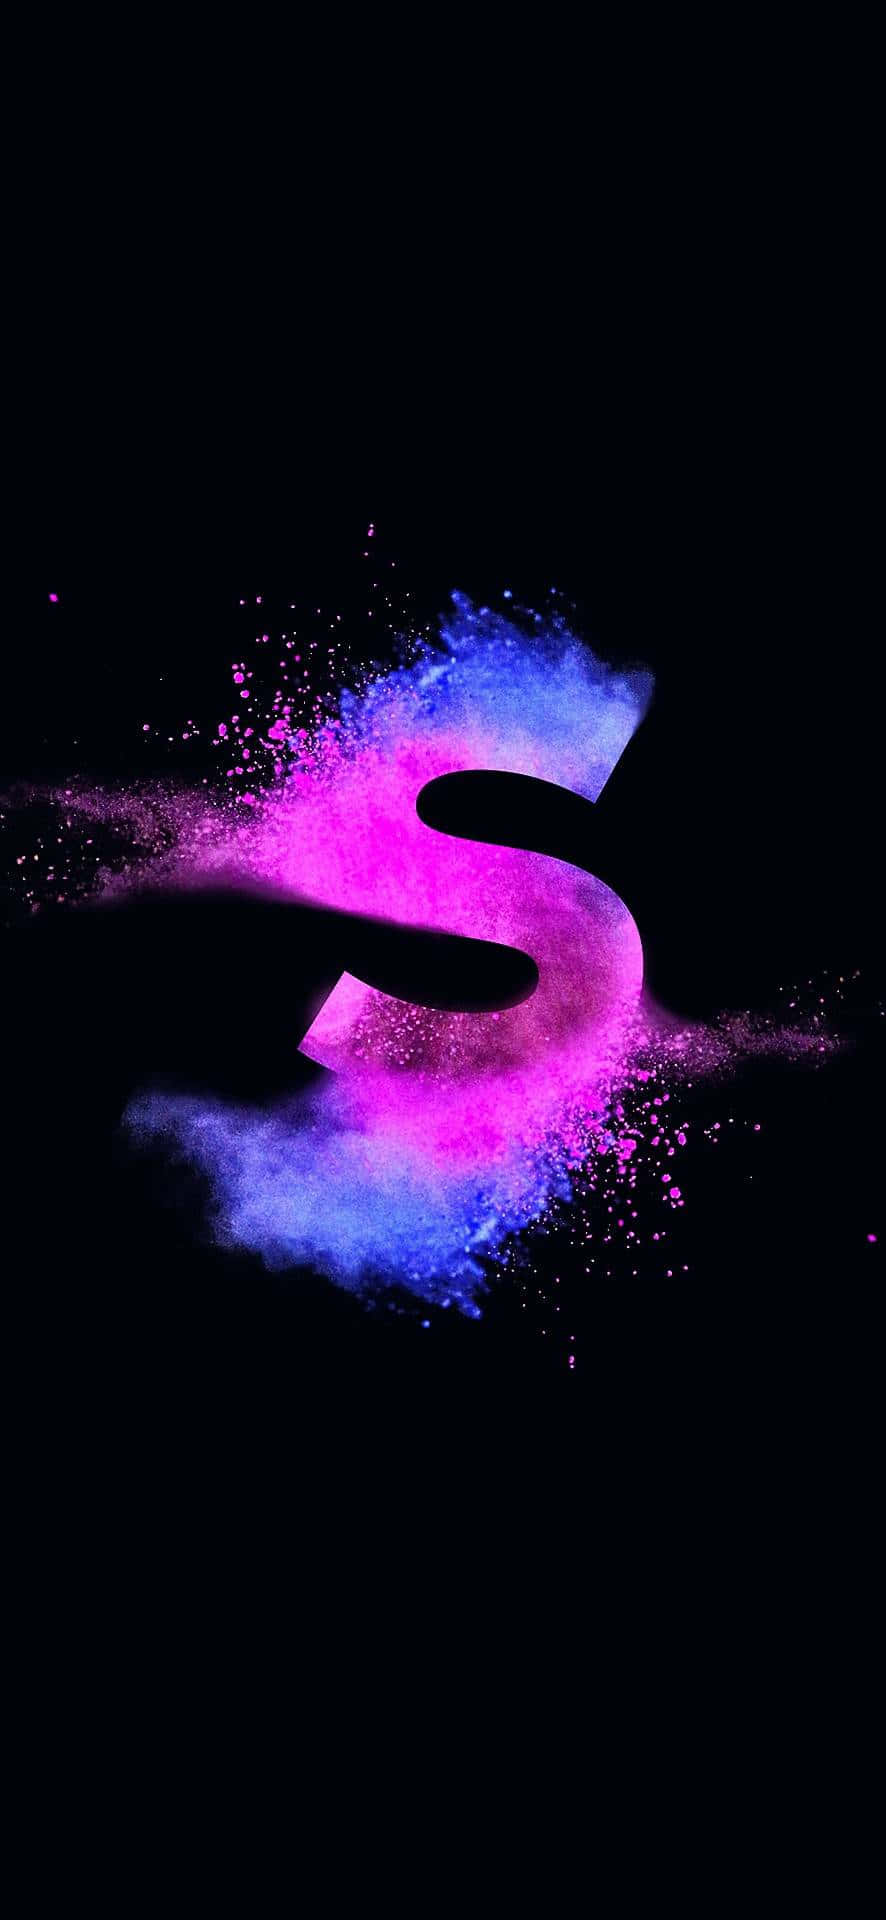 A Blue And Pink Letter S On A Black Background Wallpaper